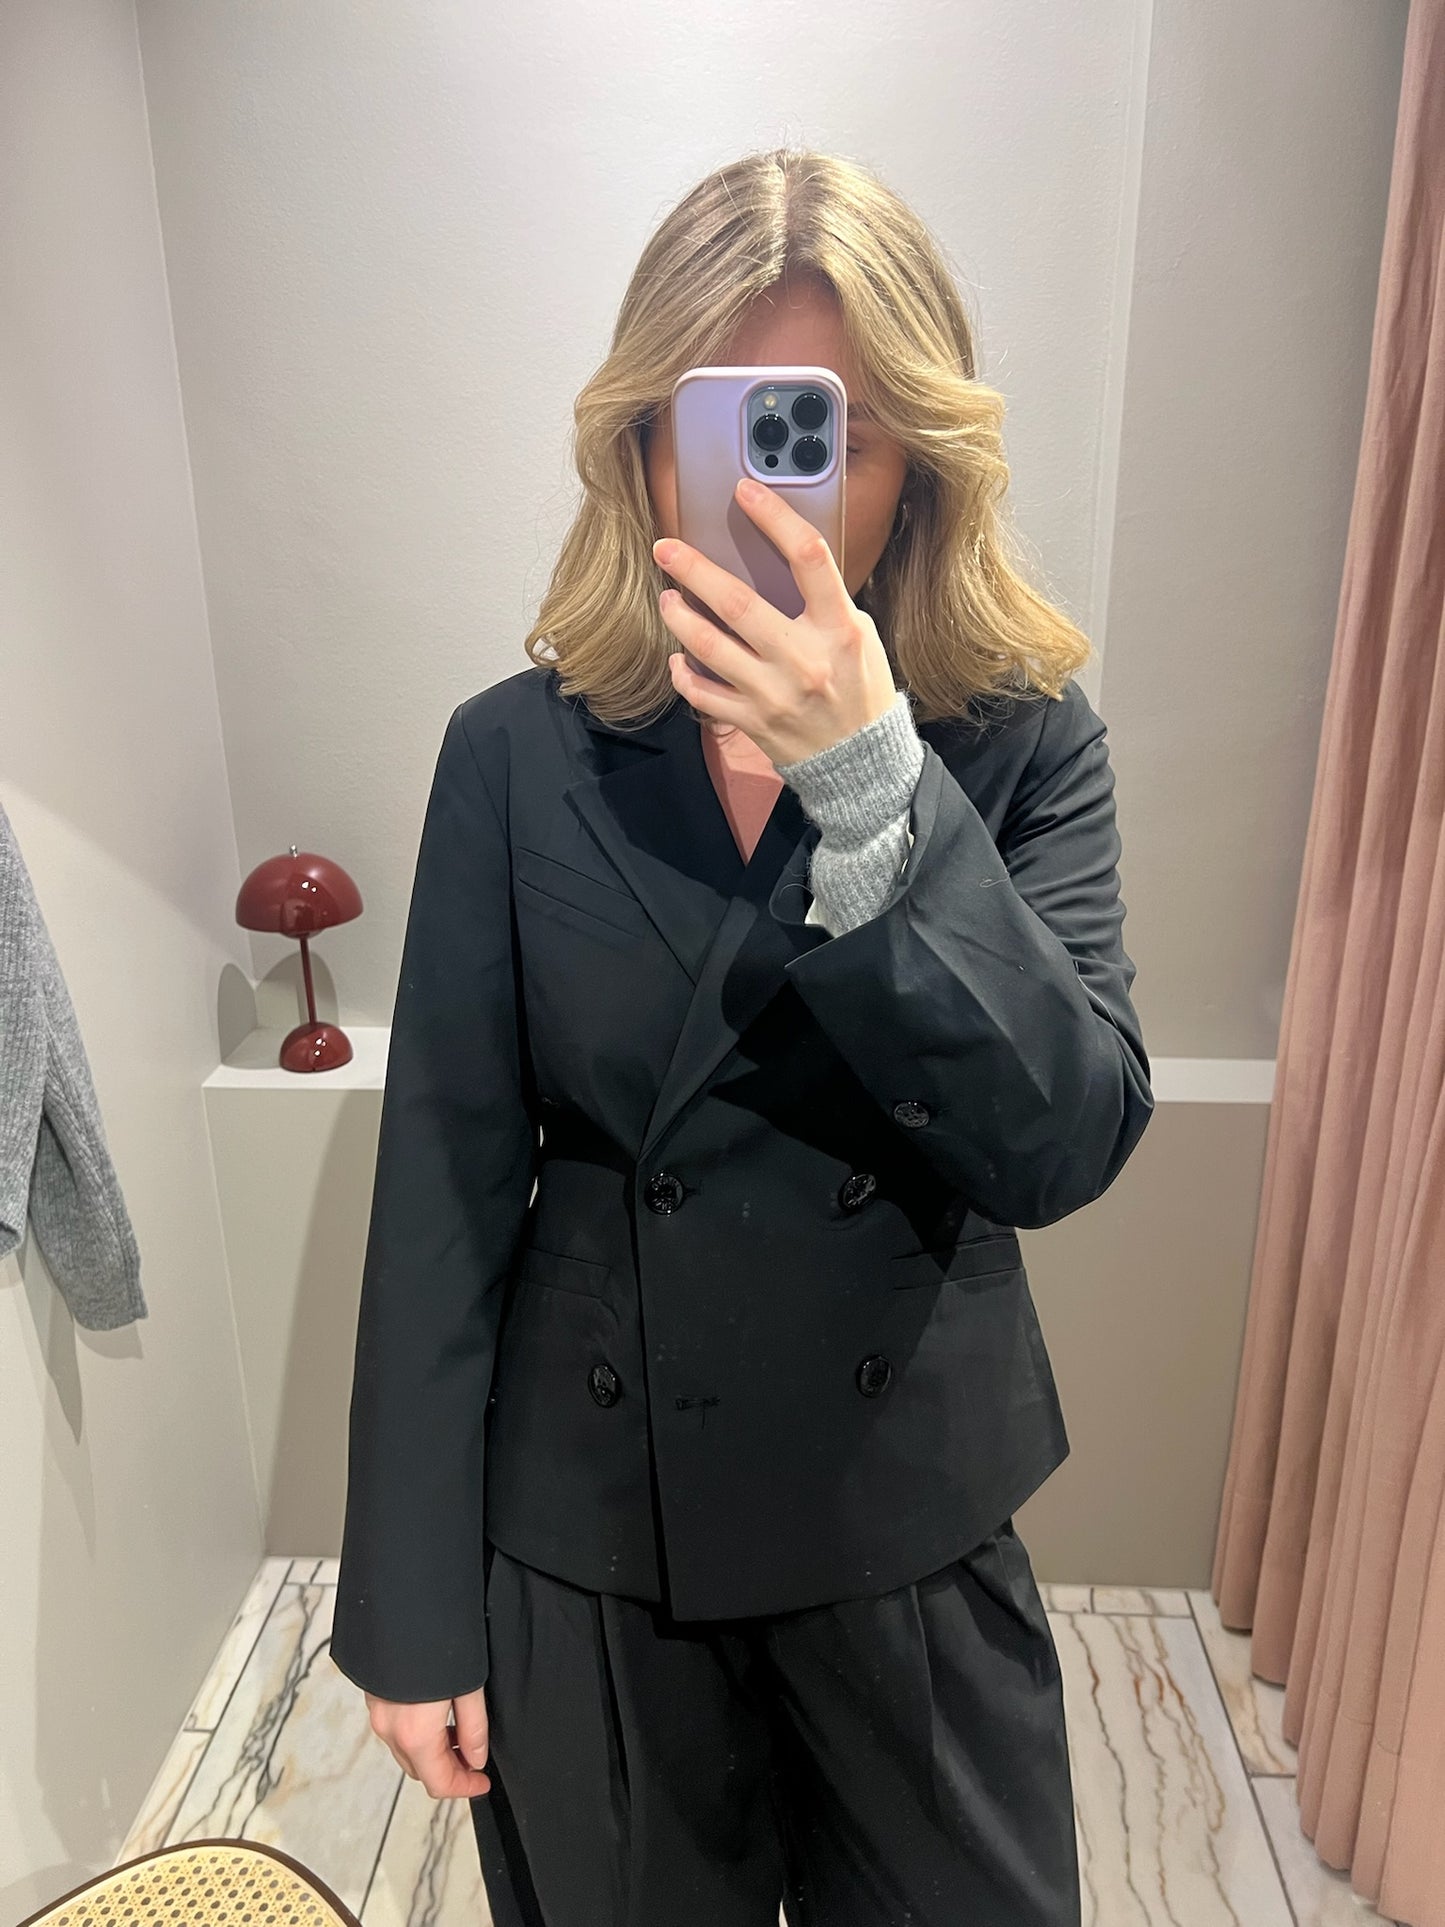 GANNI Drapey Melange Fitted Double Breasted Blazer